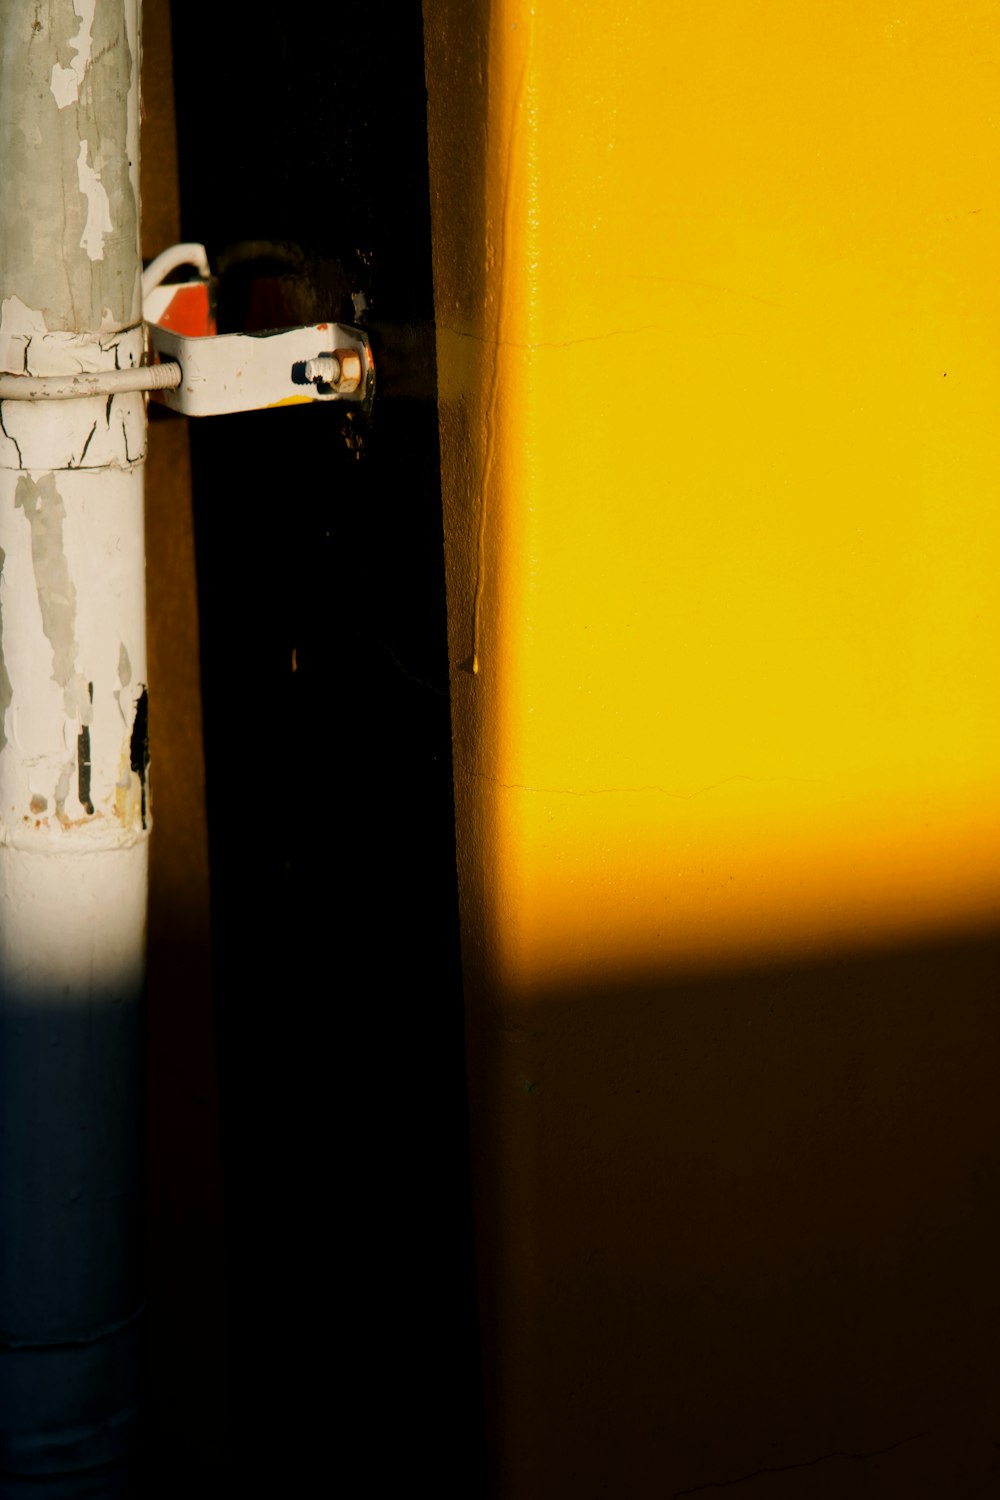 a close up of a white pipe with a yellow wall in the background